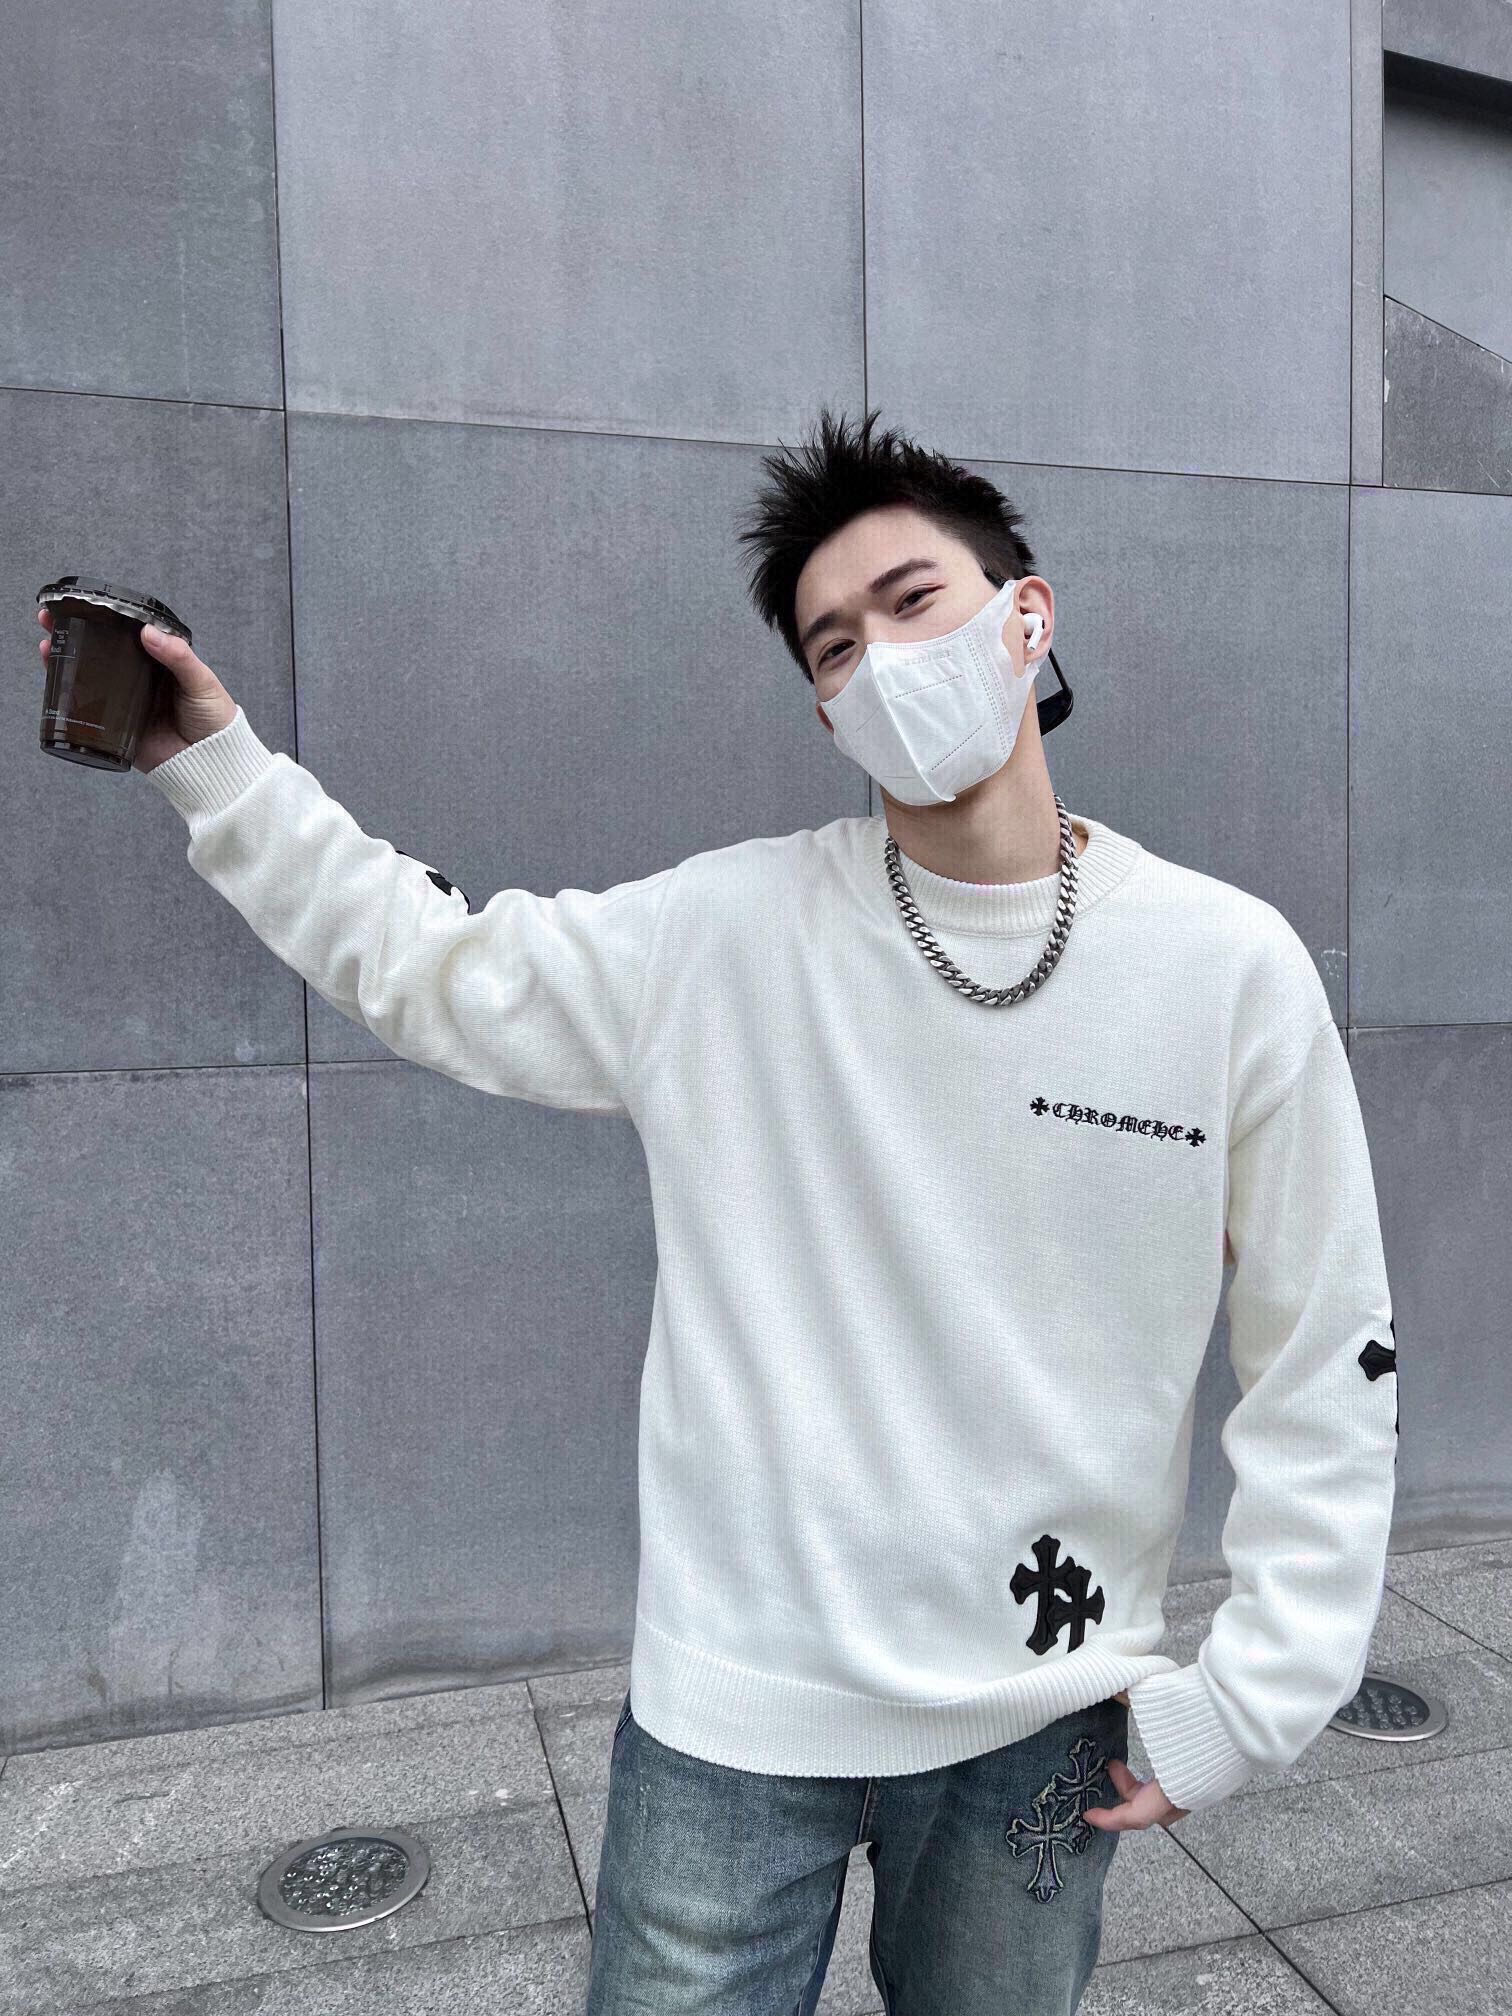 Chrome Hearts Clothing Sweatshirts Black White Embroidery Cotton Fall/Winter Collection Fashion